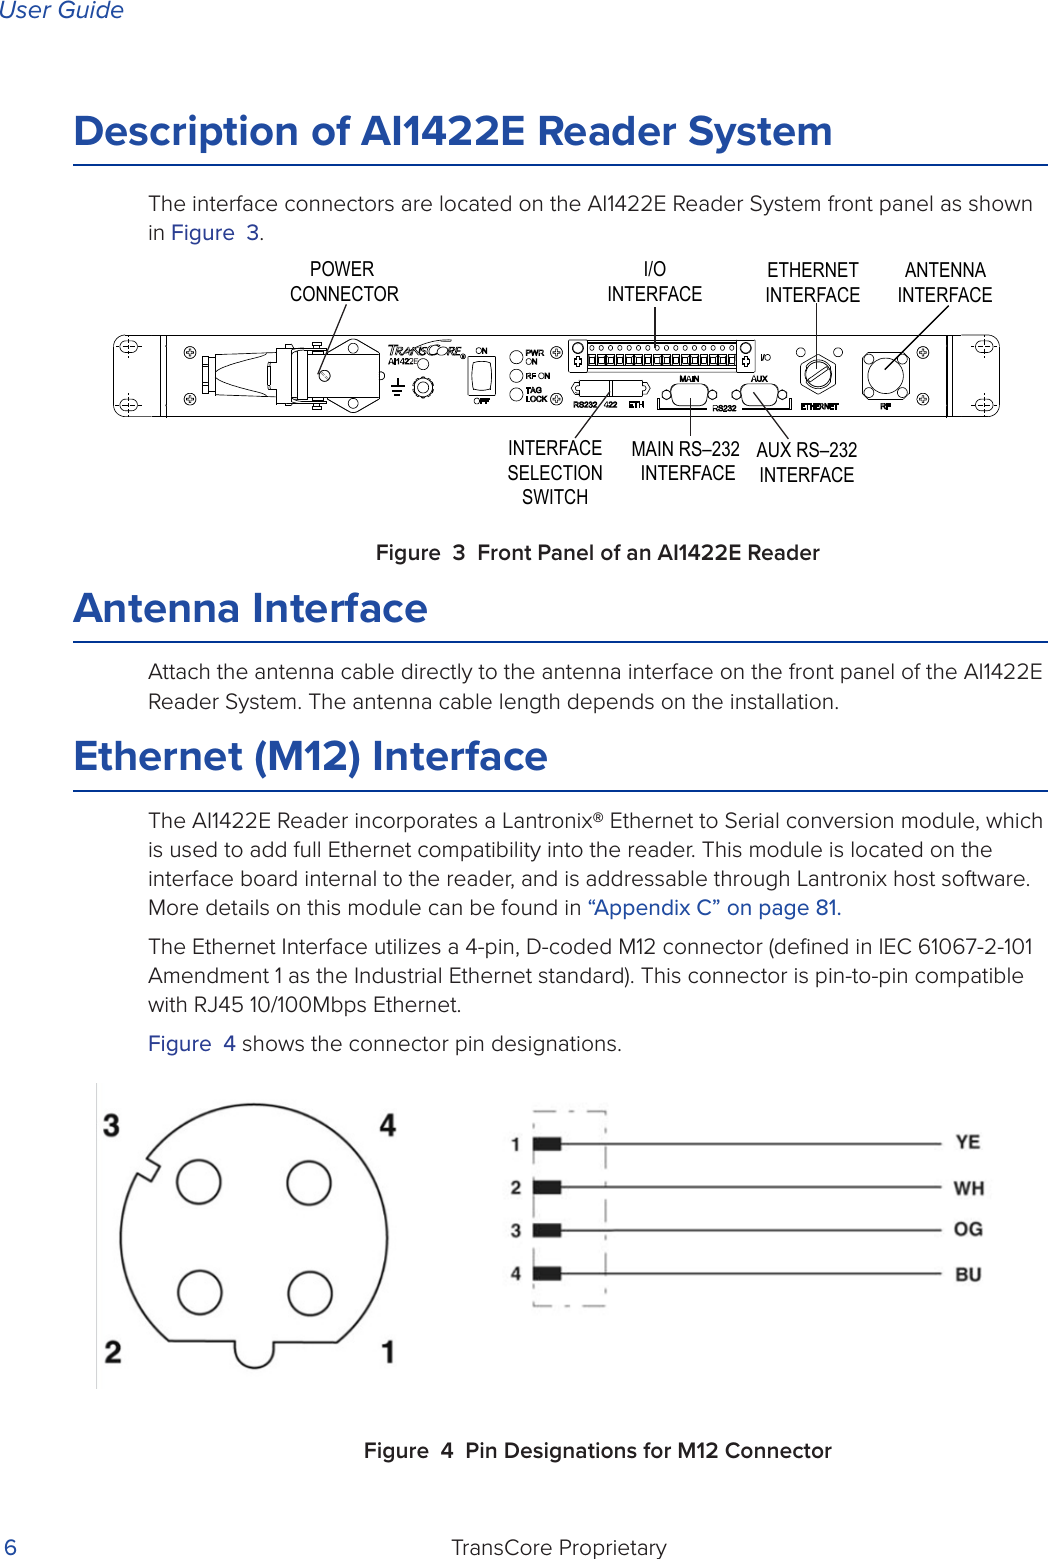 User GuideTransCore Proprietary 6Description of AI1422E Reader SystemThe interface connectors are located on the AI1422E Reader System front panel as shown in Figure 3.Figure 3 Front Panel of an AI1422E ReaderAntenna InterfaceAttach the antenna cable directly to the antenna interface on the front panel of the AI1422E Reader System. The antenna cable length depends on the installation.Ethernet (M12) InterfaceThe AI1422E Reader incorporates a Lantronix® Ethernet to Serial conversion module, which is used to add full Ethernet compatibility into the reader. This module is located on the interface board internal to the reader, and is addressable through Lantronix host software. More details on this module can be found in “Appendix C” on page 81.The Ethernet Interface utilizes a 4-pin, D-coded M12 connector (deﬁned in IEC 61067-2-101 Amendment 1 as the Industrial Ethernet standard). This connector is pin-to-pin compatible with RJ45 10/100Mbps Ethernet.Figure 4 shows the connector pin designations.Figure 4 Pin Designations for M12 ConnectorANTENNAINTERFACEETHERNETINTERFACEAUX RS–232INTERFACEMAIN RS–232 INTERFACEINTERFACESELECTIONSWITCHPOWER CONNECTORI/OINTERFACE